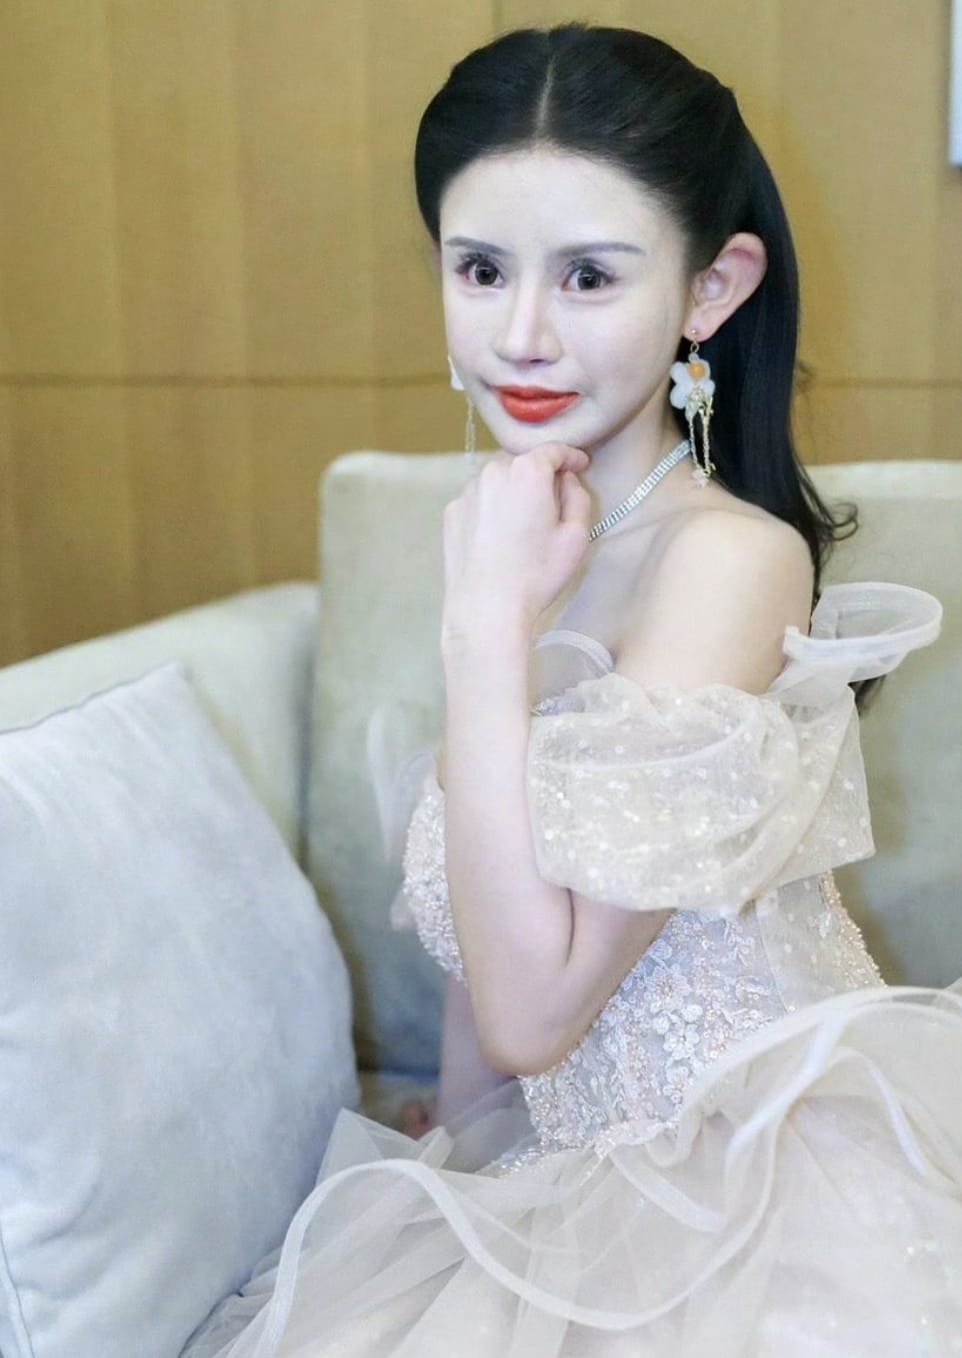 Chinese Influencer, 20, Has Spent More Than S$746.5K On Hundreds Of Plastic Surgery Procedures Since She Was 13